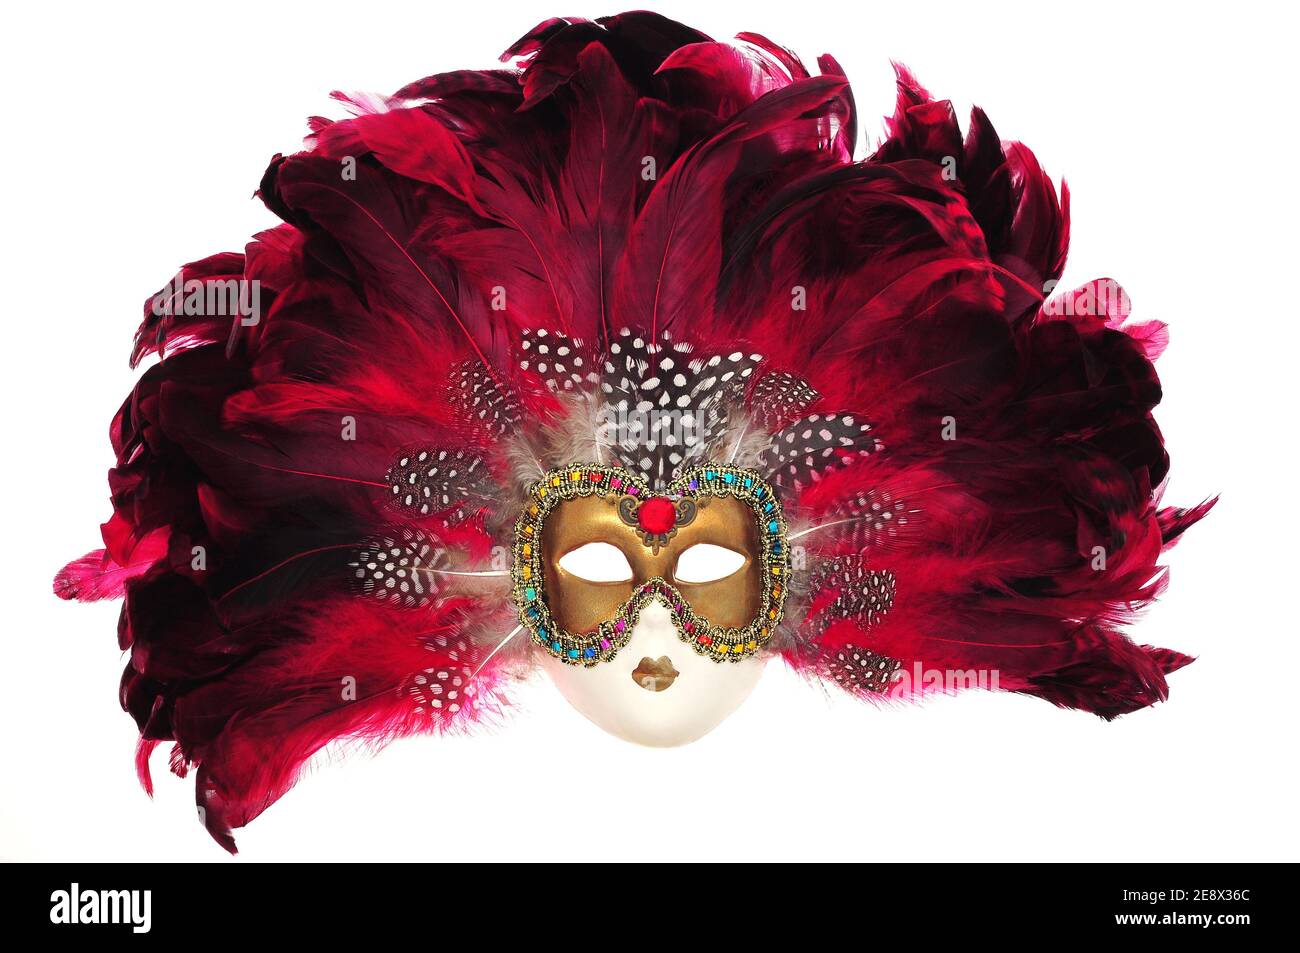 Red carnival mask with feathers Stock Photo